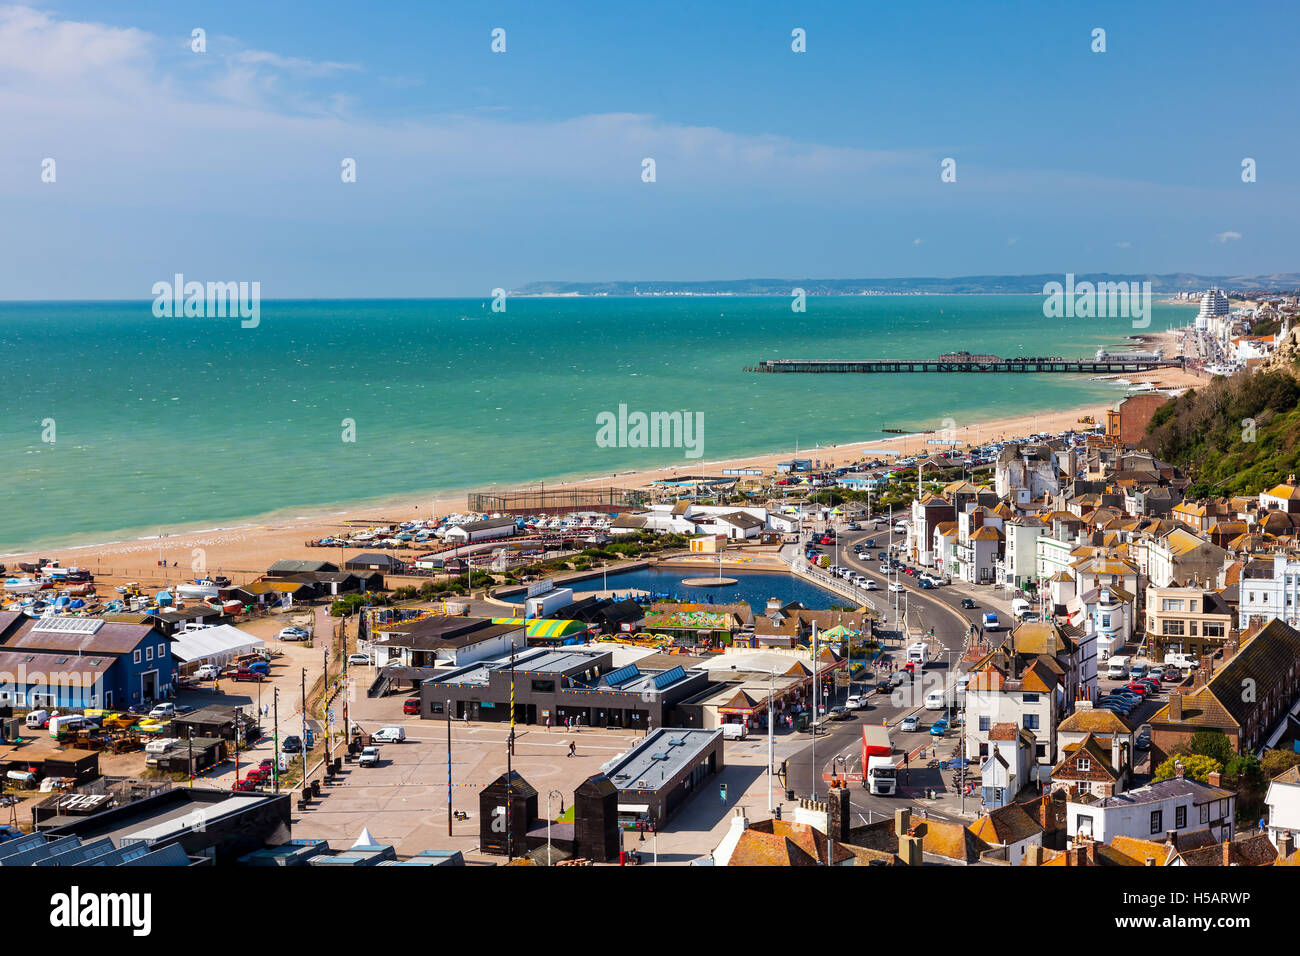 Overlooking the town of Hastings East Susses England UK Europe Stock Photo